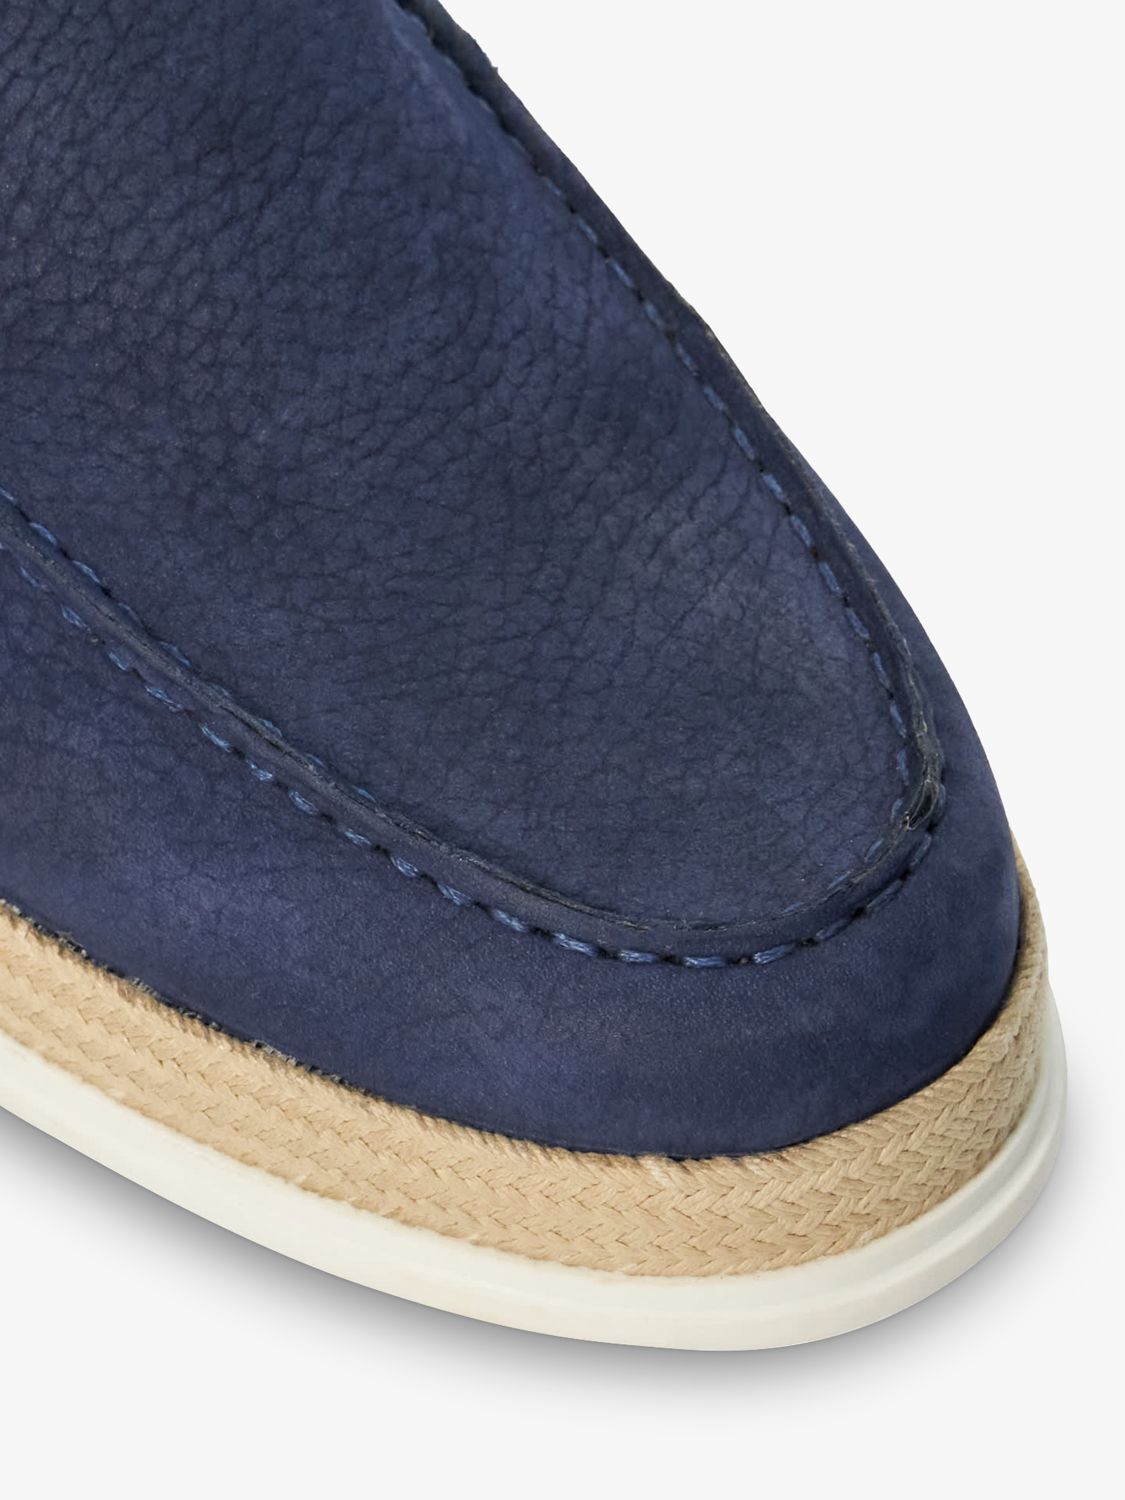 Dune Bountii Leather Espadrille Detail Shoes, Navy, 10